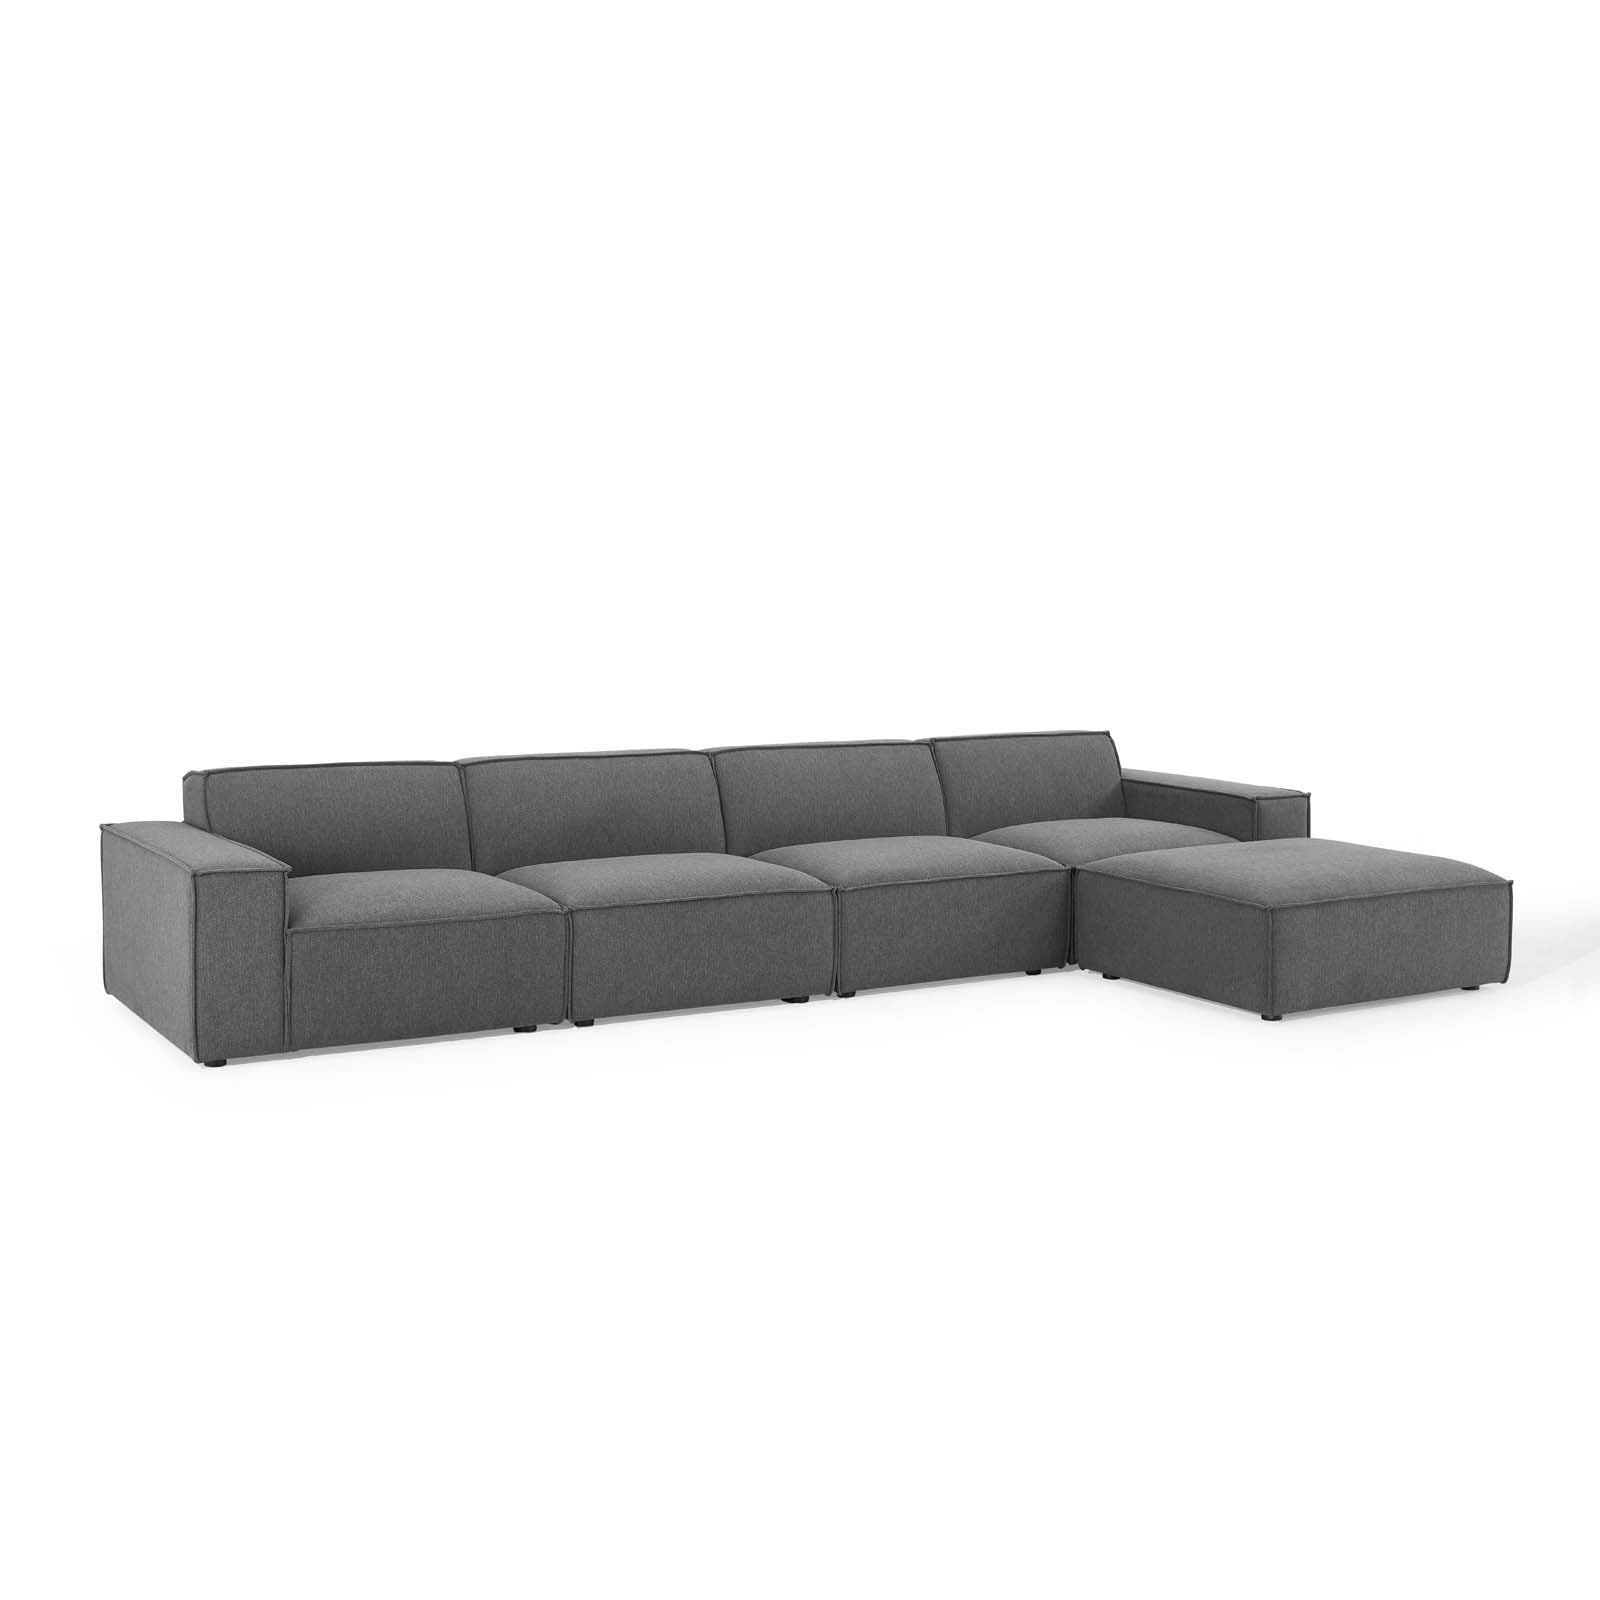 Modway Sectional Sofas - 164" Restore 5-Piece Sectional Sofa Charcoal